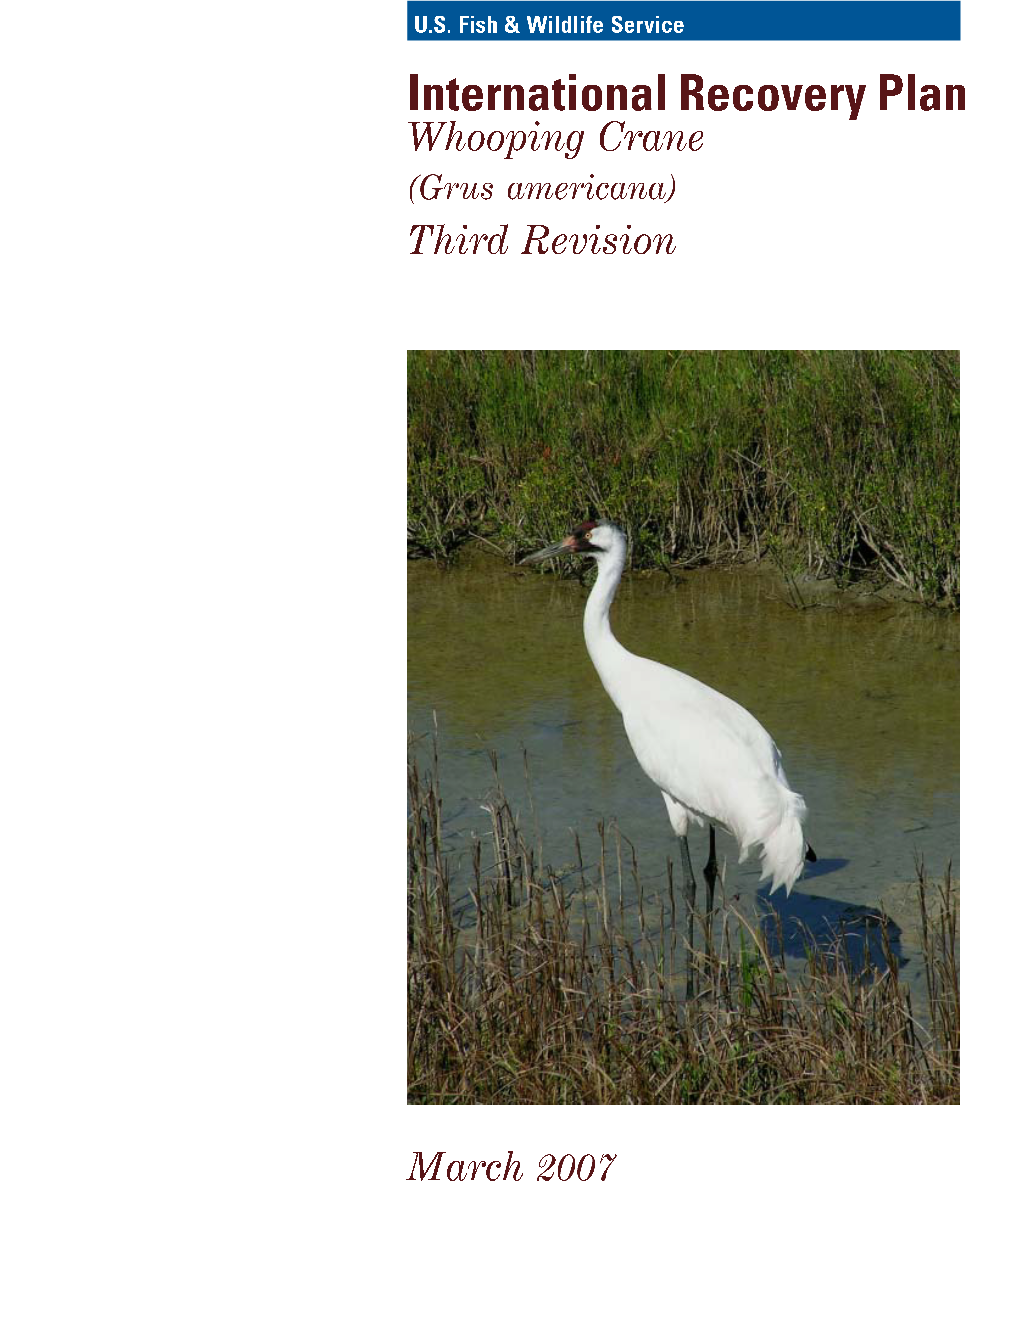 International Whooping Crane Recovery Plan for a 60-Day Review and Comment Period Ending on March 11, 2005